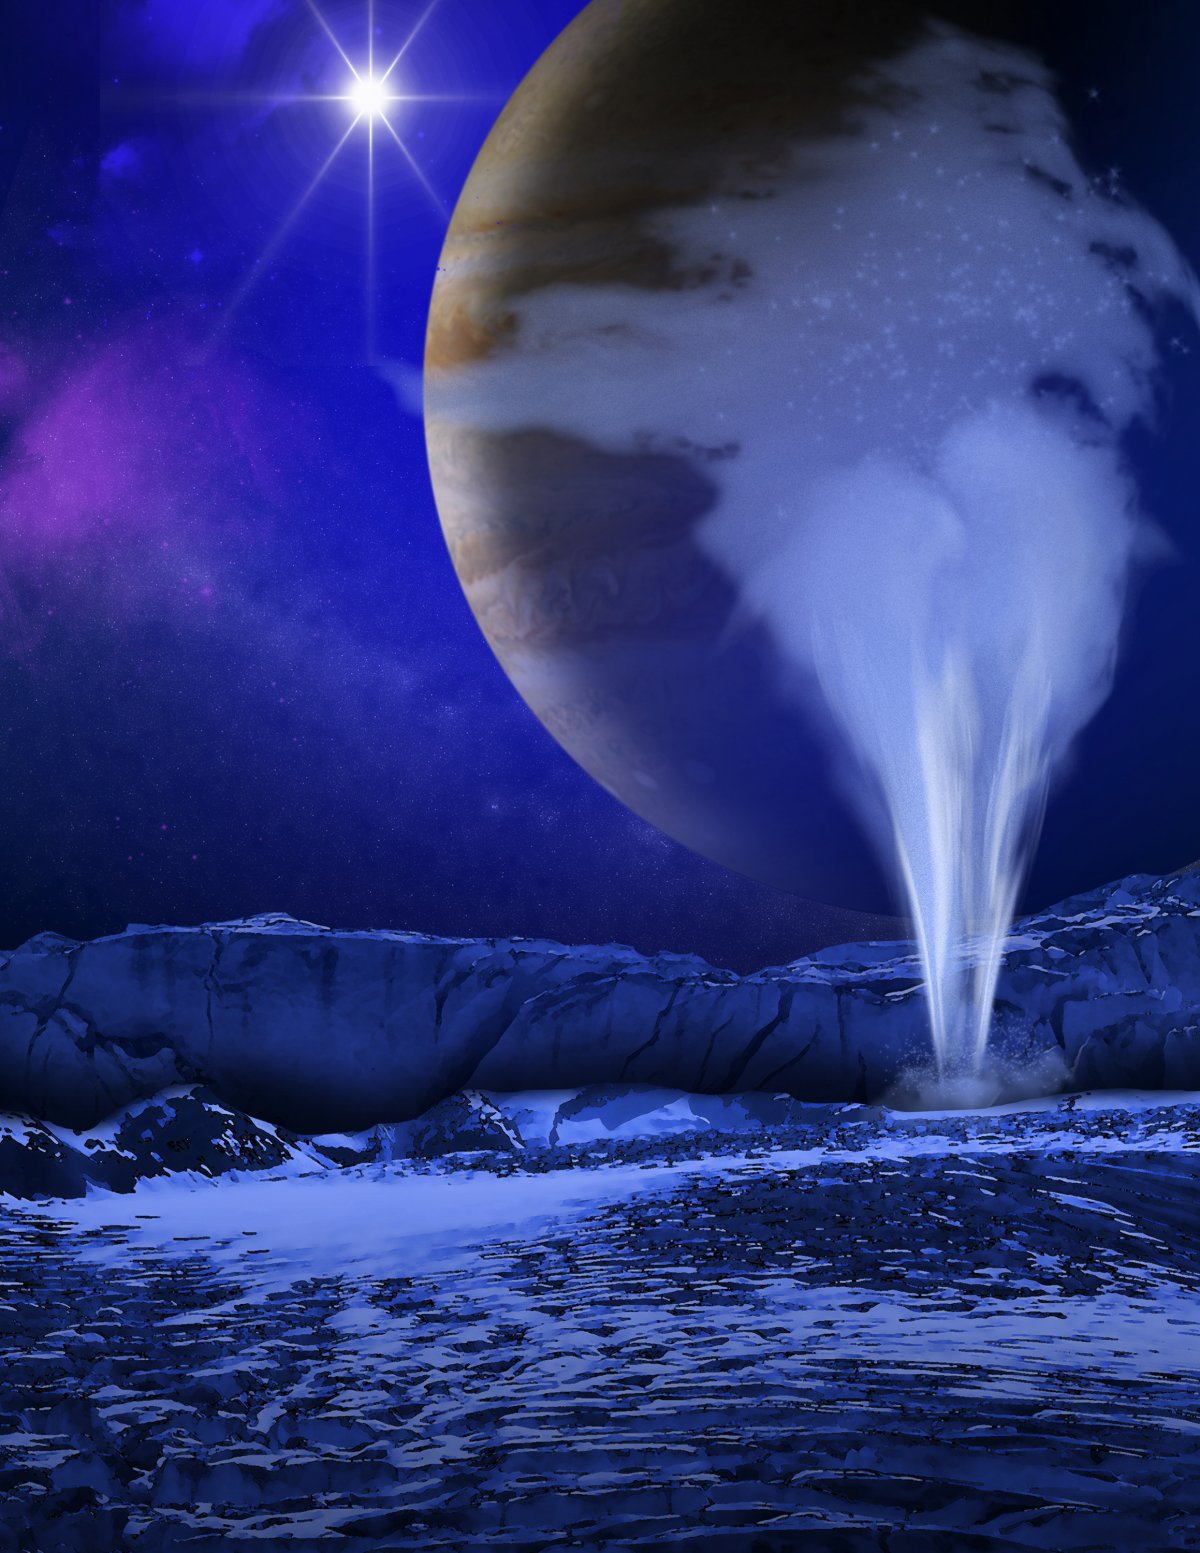 NASA will plunge the spacecraft into Jupiter's clouds in 2018 or 2019. This will prevent it from spreading any bacteria from Earth on the gas giant's icy, ocean-filled moons like Europa and Ganymede.